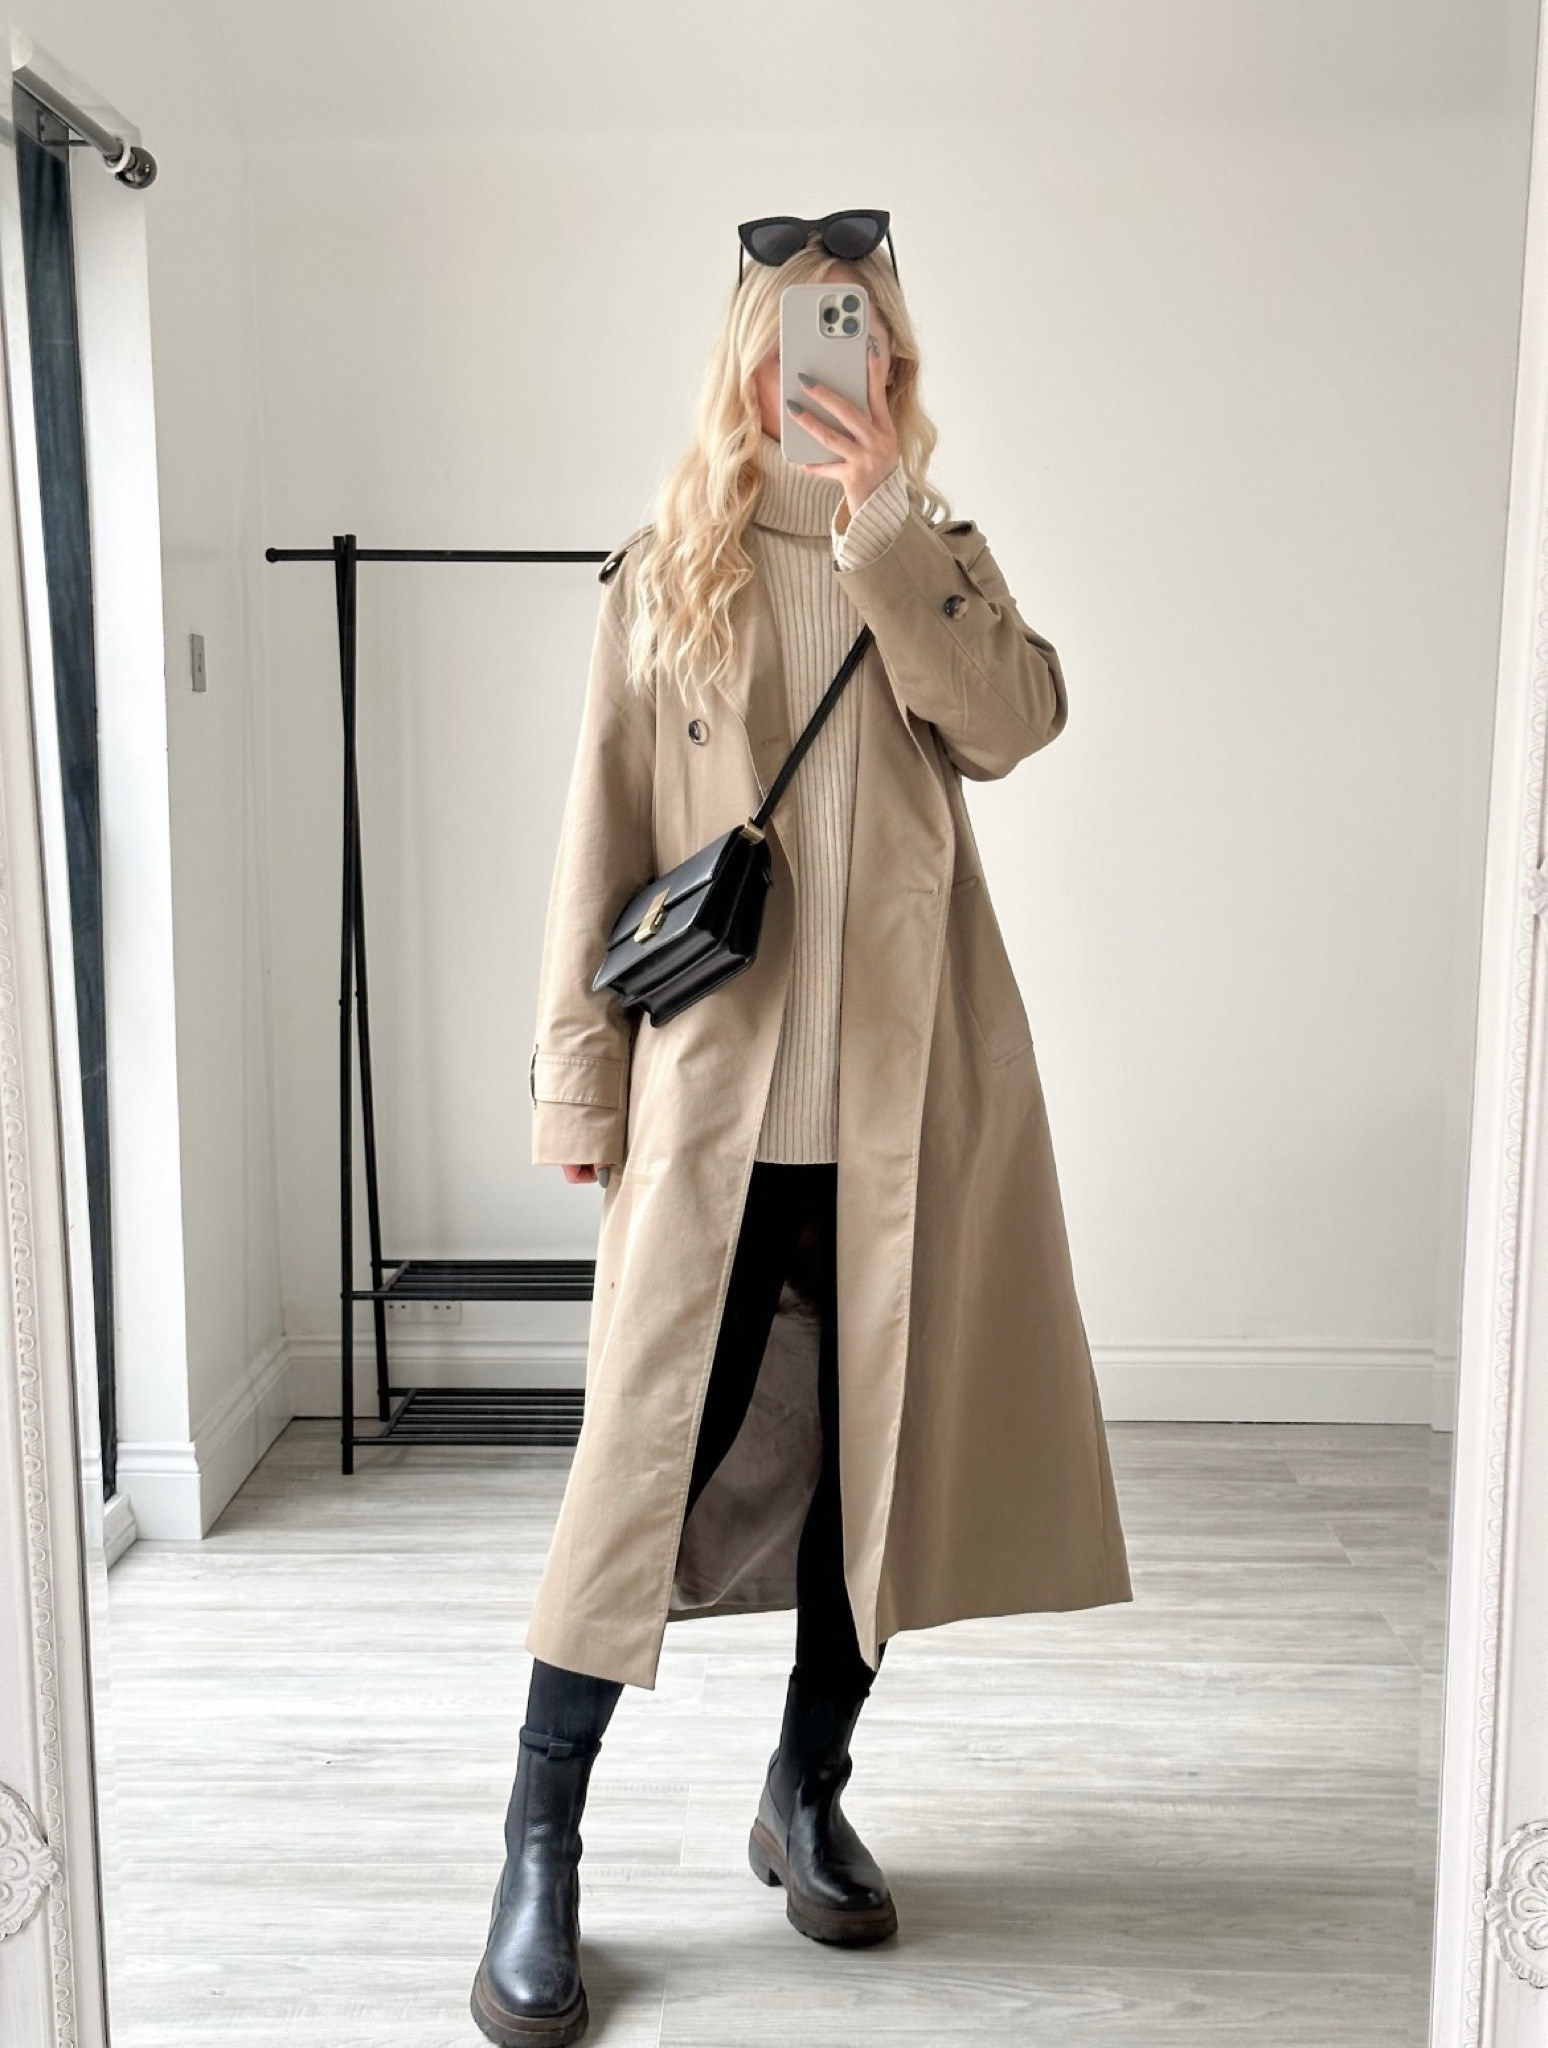 Stylish Black Double Faced Trench Coat Buttons For Women Perfect For Middle  To Long Winter Wear In Autumn And Winter From Biancanne, $216.23